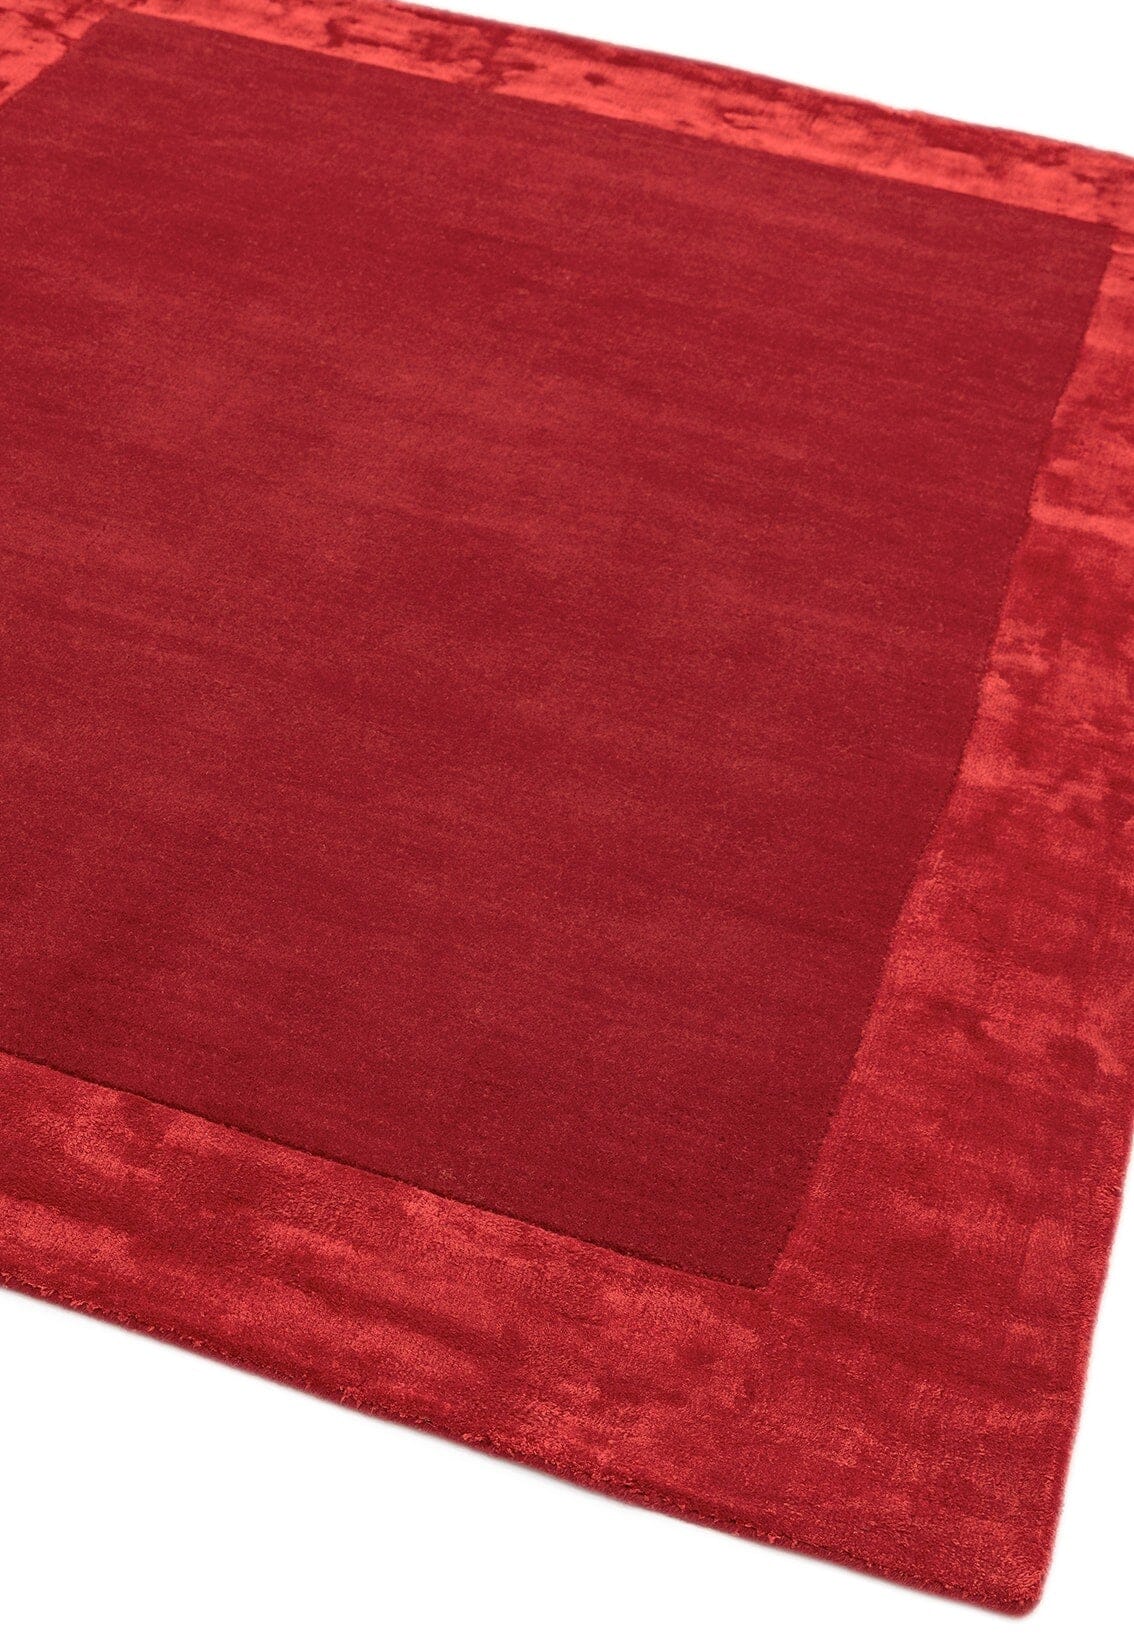  Asiatic Carpets-Asiatic Carpets Ascot Hand Woven Rug Red - 200 x 290cm-Red 333 